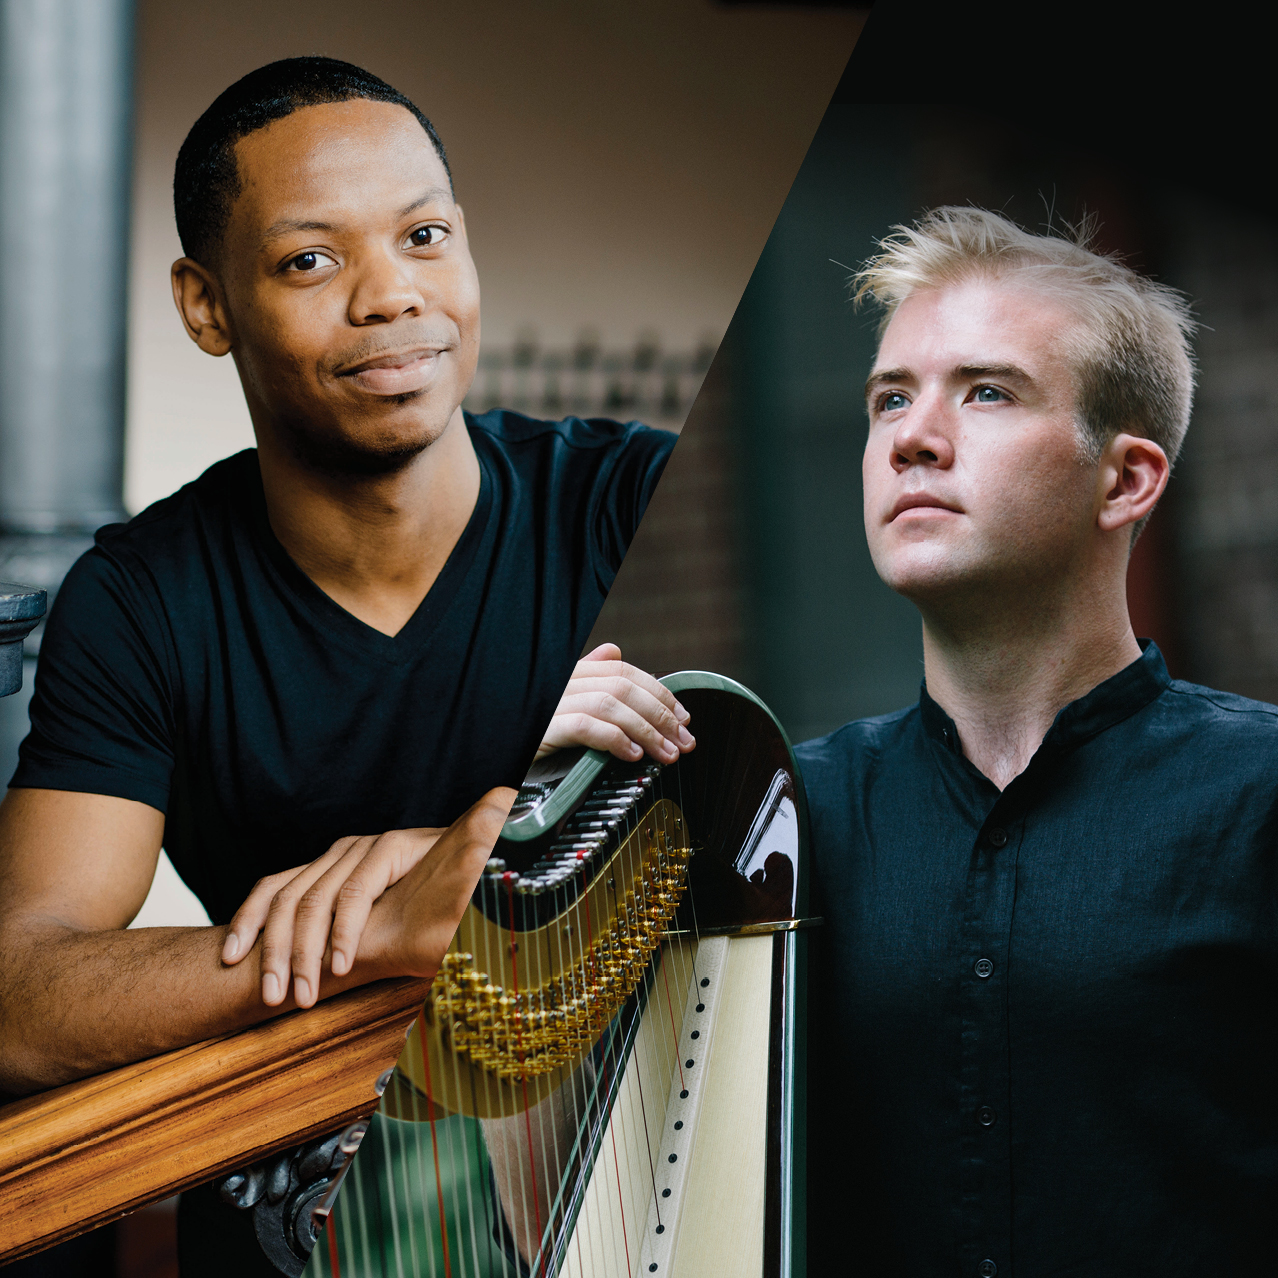 On the left, a Black man smiles at the camera. On the right, a white man poses with a harp.